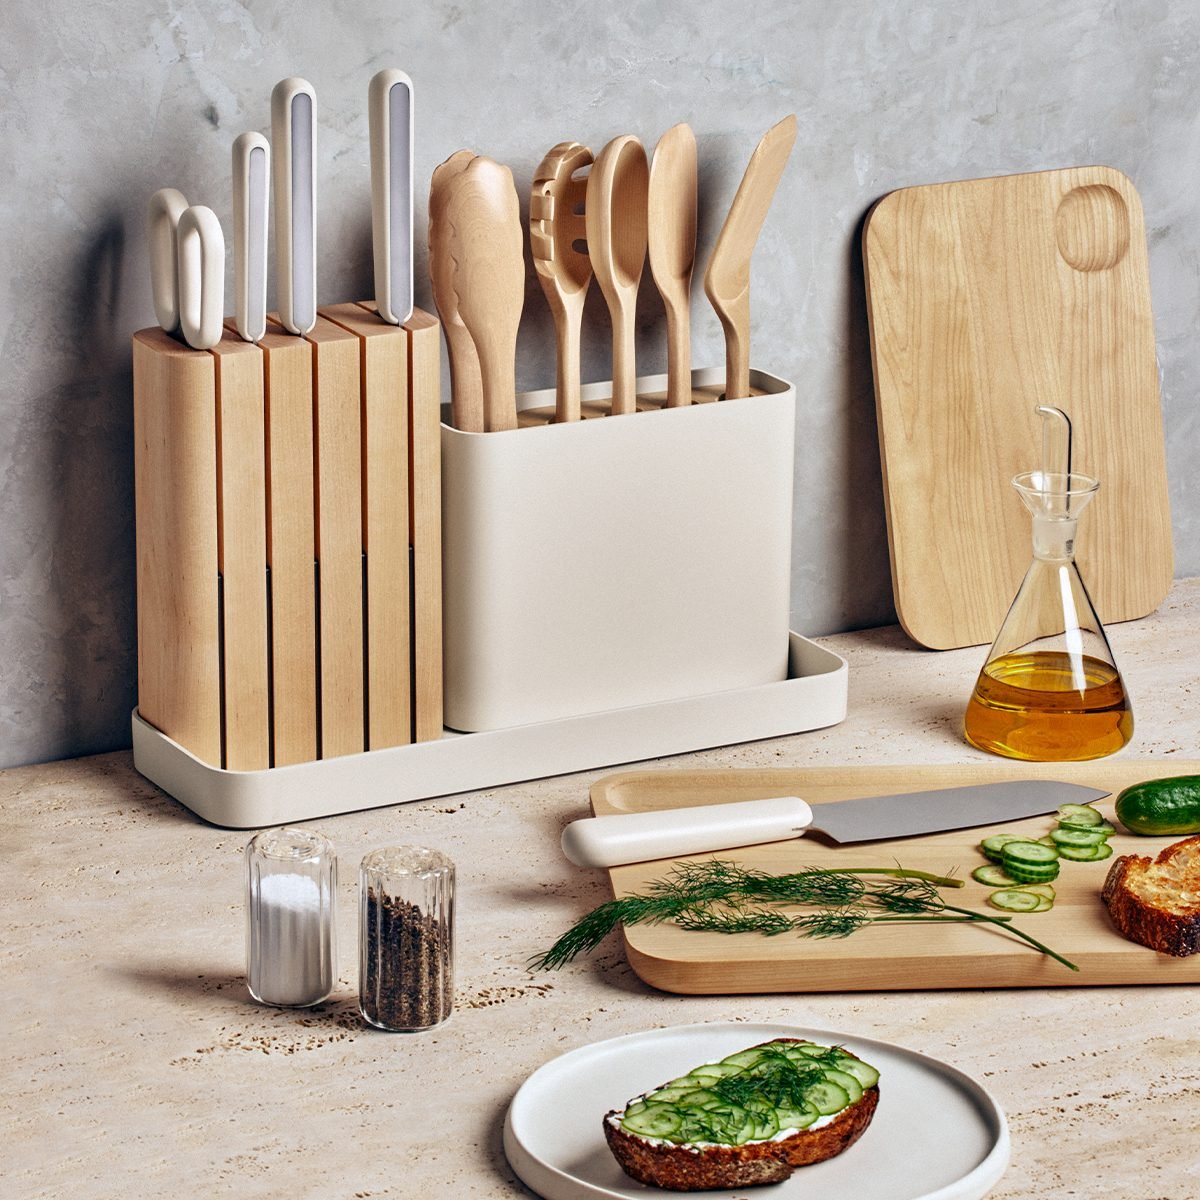 https://www.tasteofhome.com/wp-content/uploads/2023/08/Caraway-Released-a-Prep-Set-and-Cutting-Boards_FT_via-amazon.com_.jpg?fit=700%2C1024